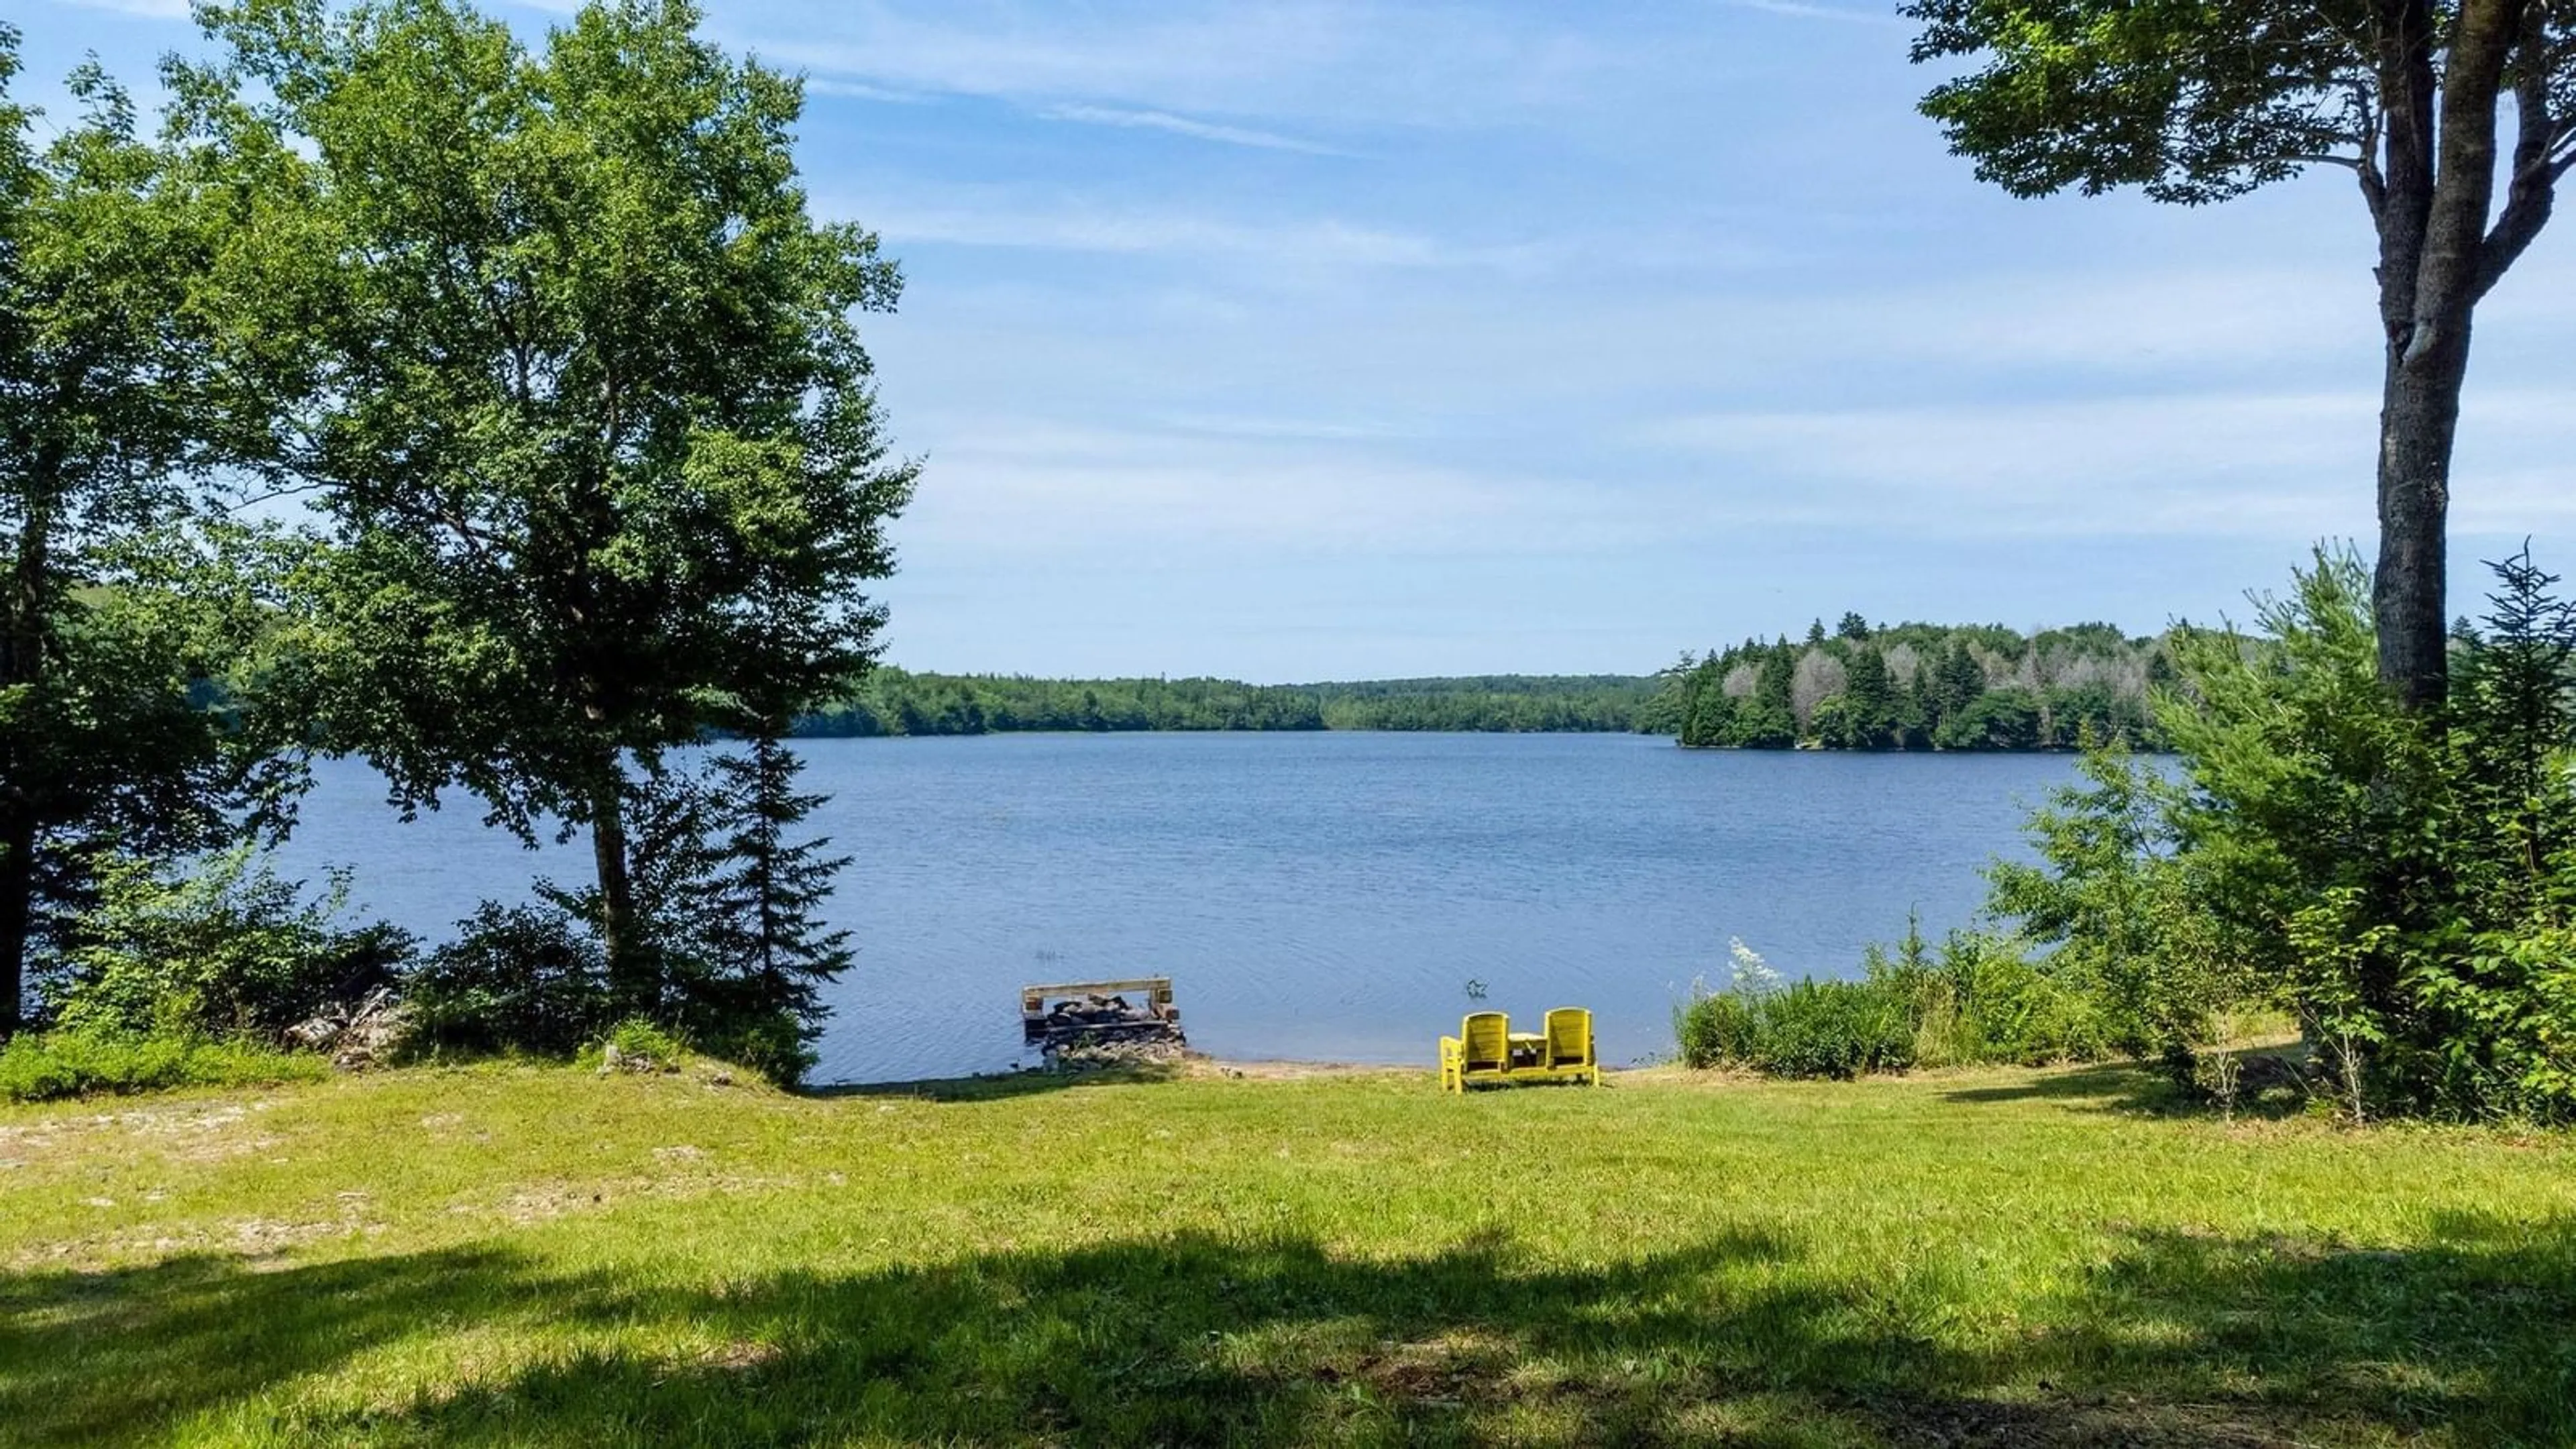 Lakeview for 83 Cottage Rd, Forest Glen Nova Scotia B0W 1L0